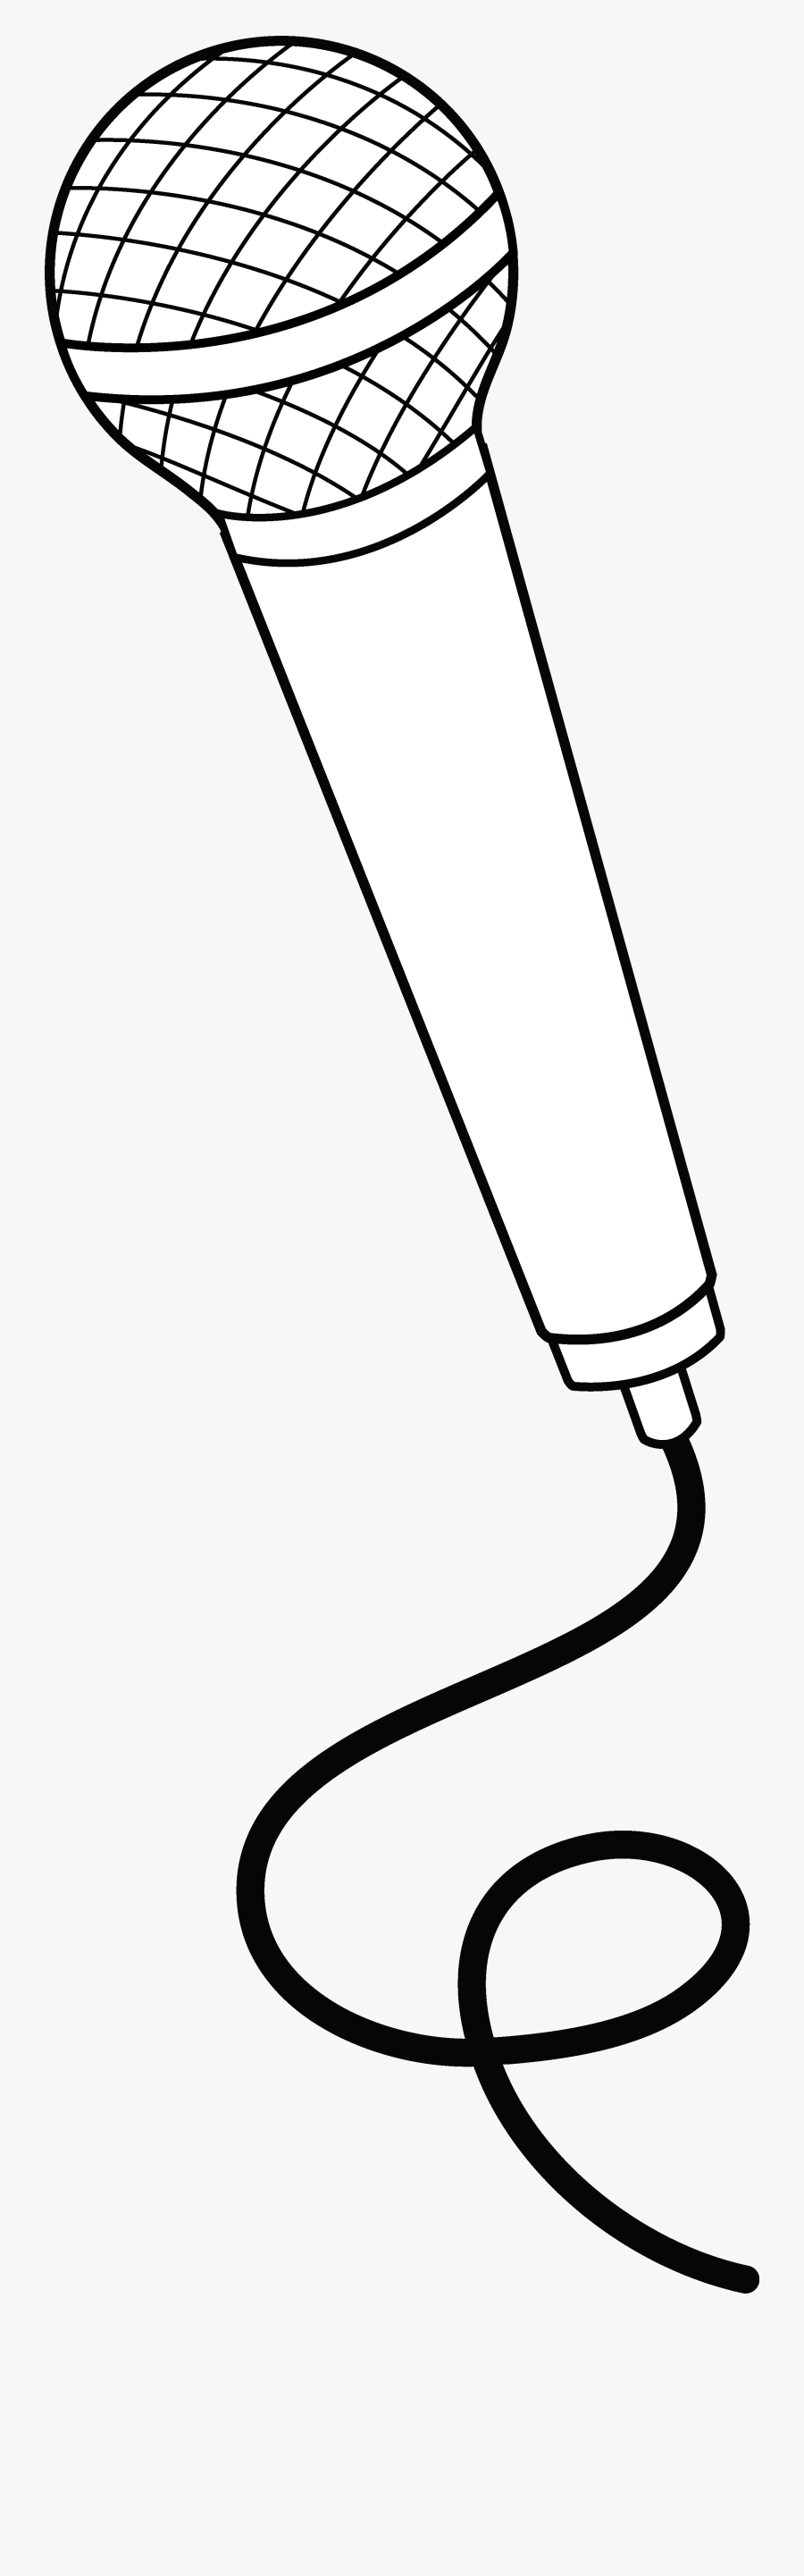 Microphone Clip Art - Microphone Easy To Draw, Transparent Clipart